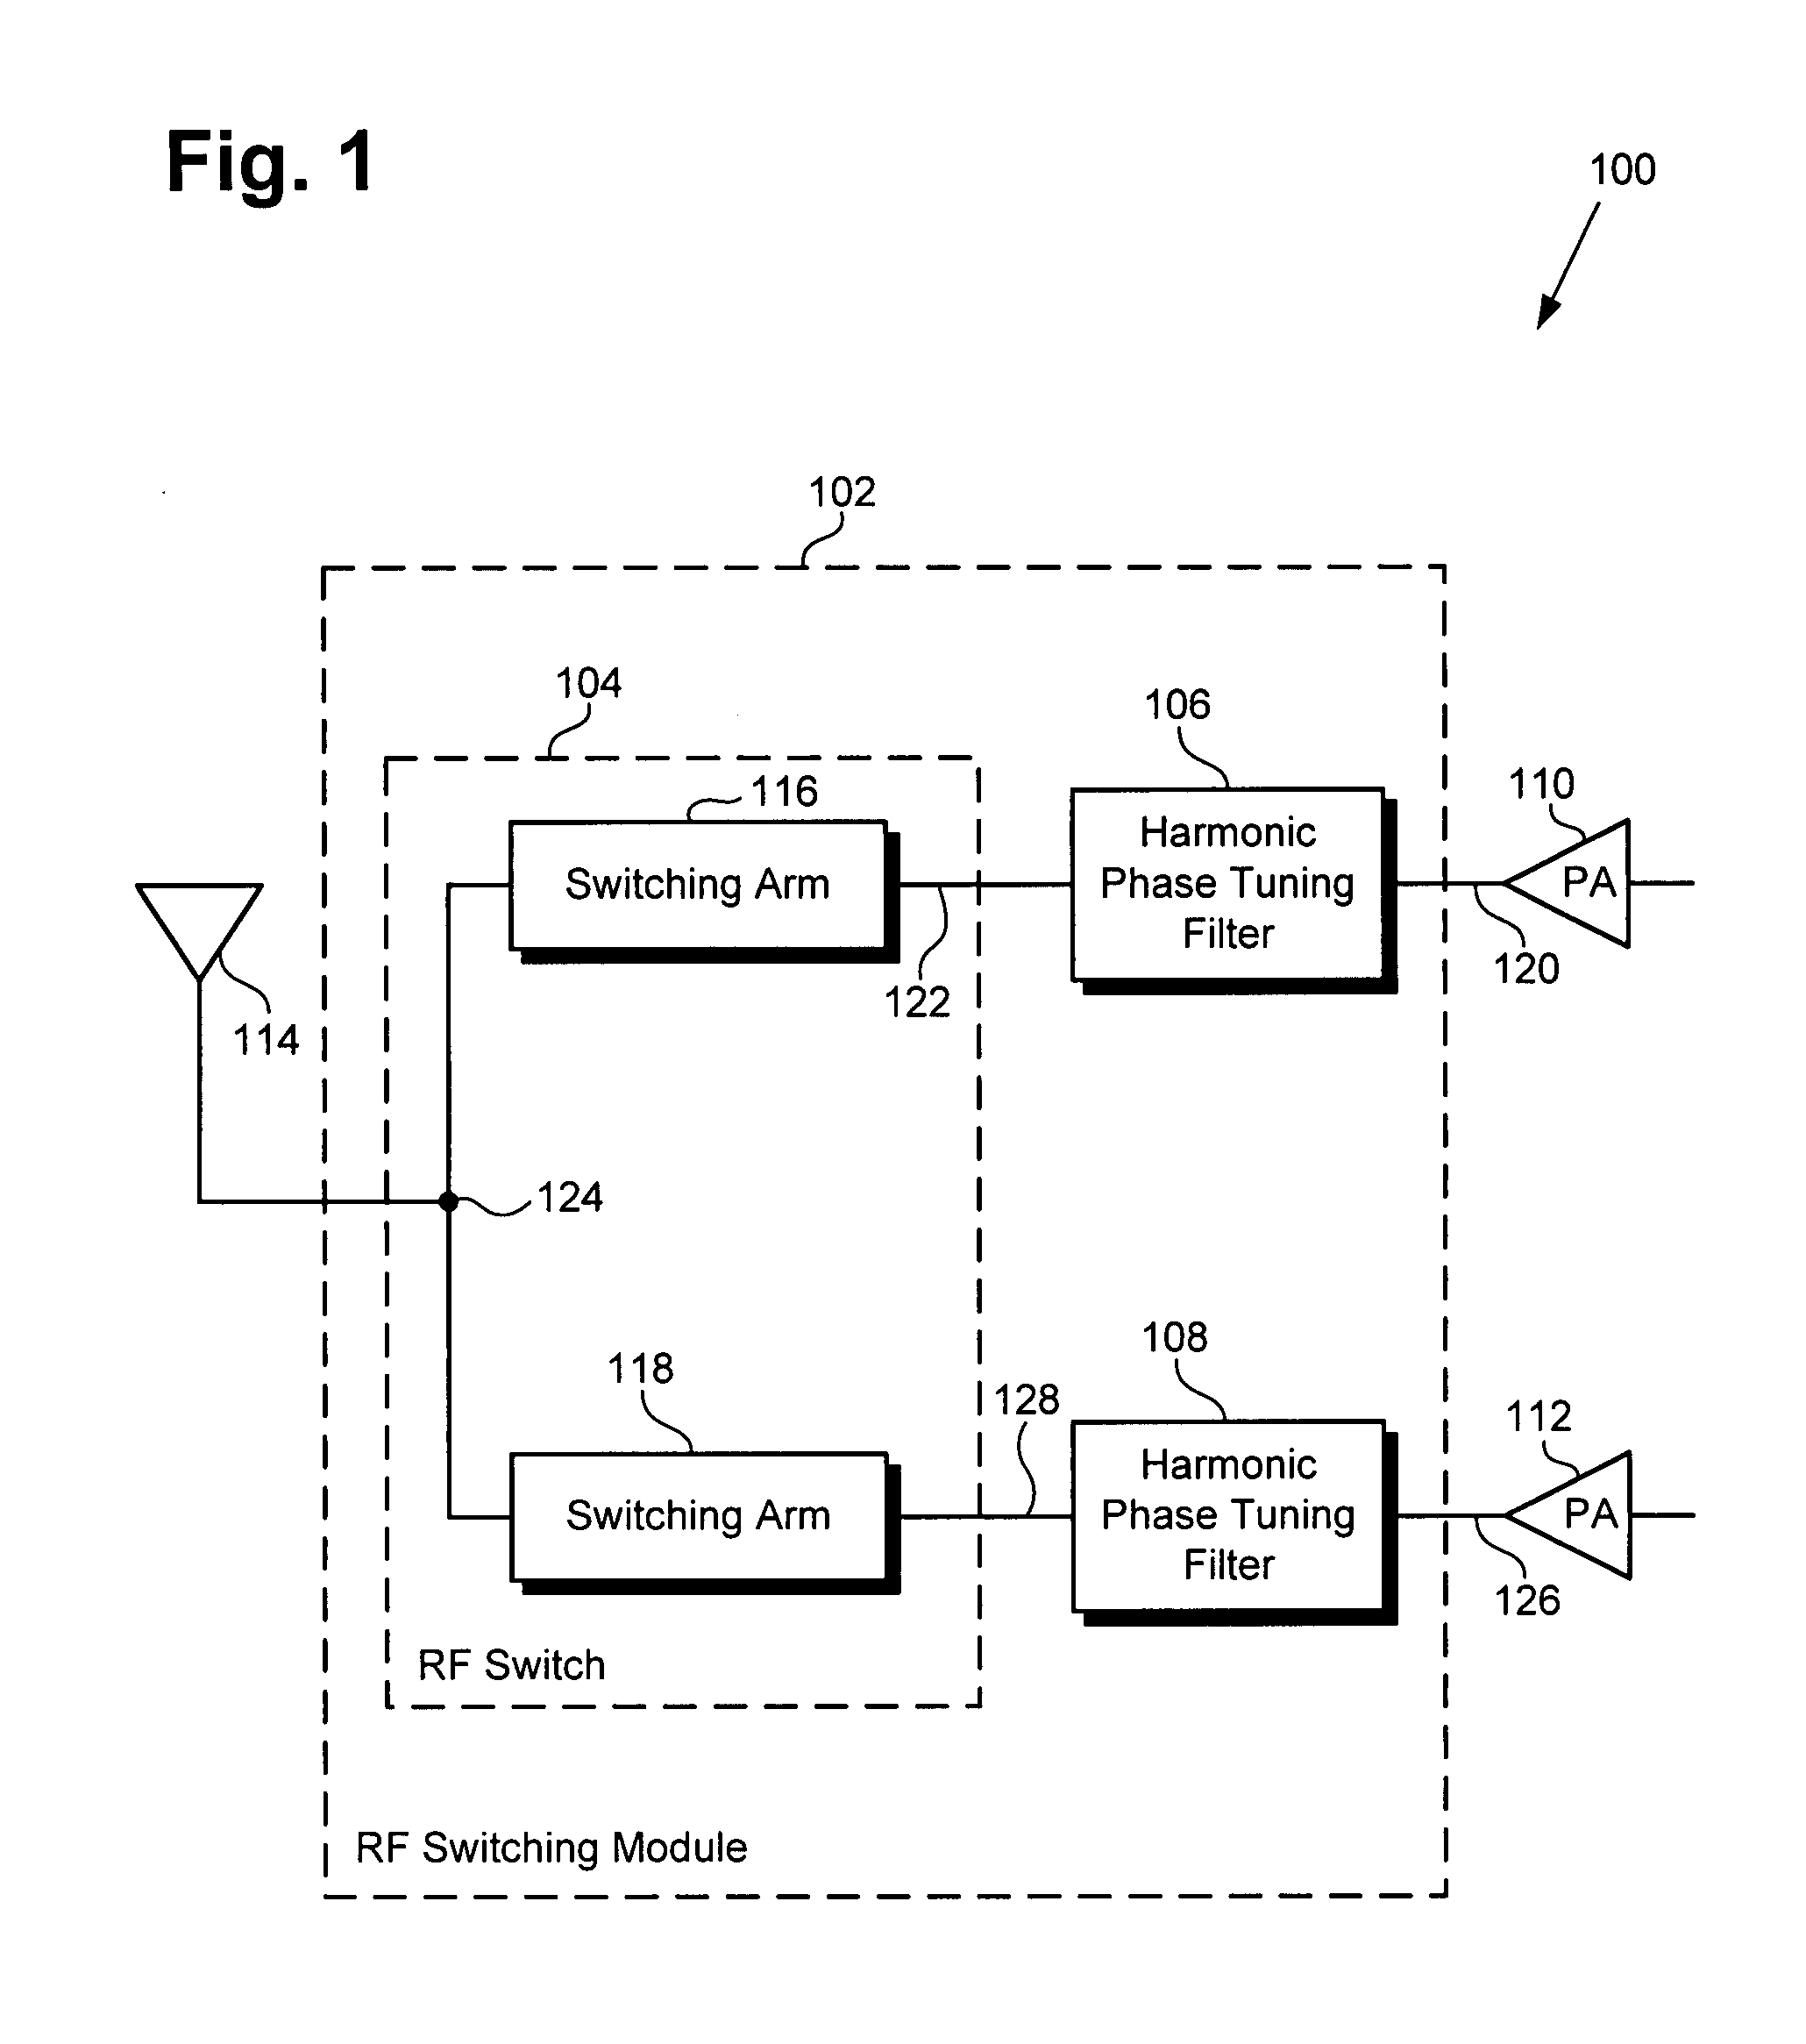 Switching module with harmonic phase tuning filter